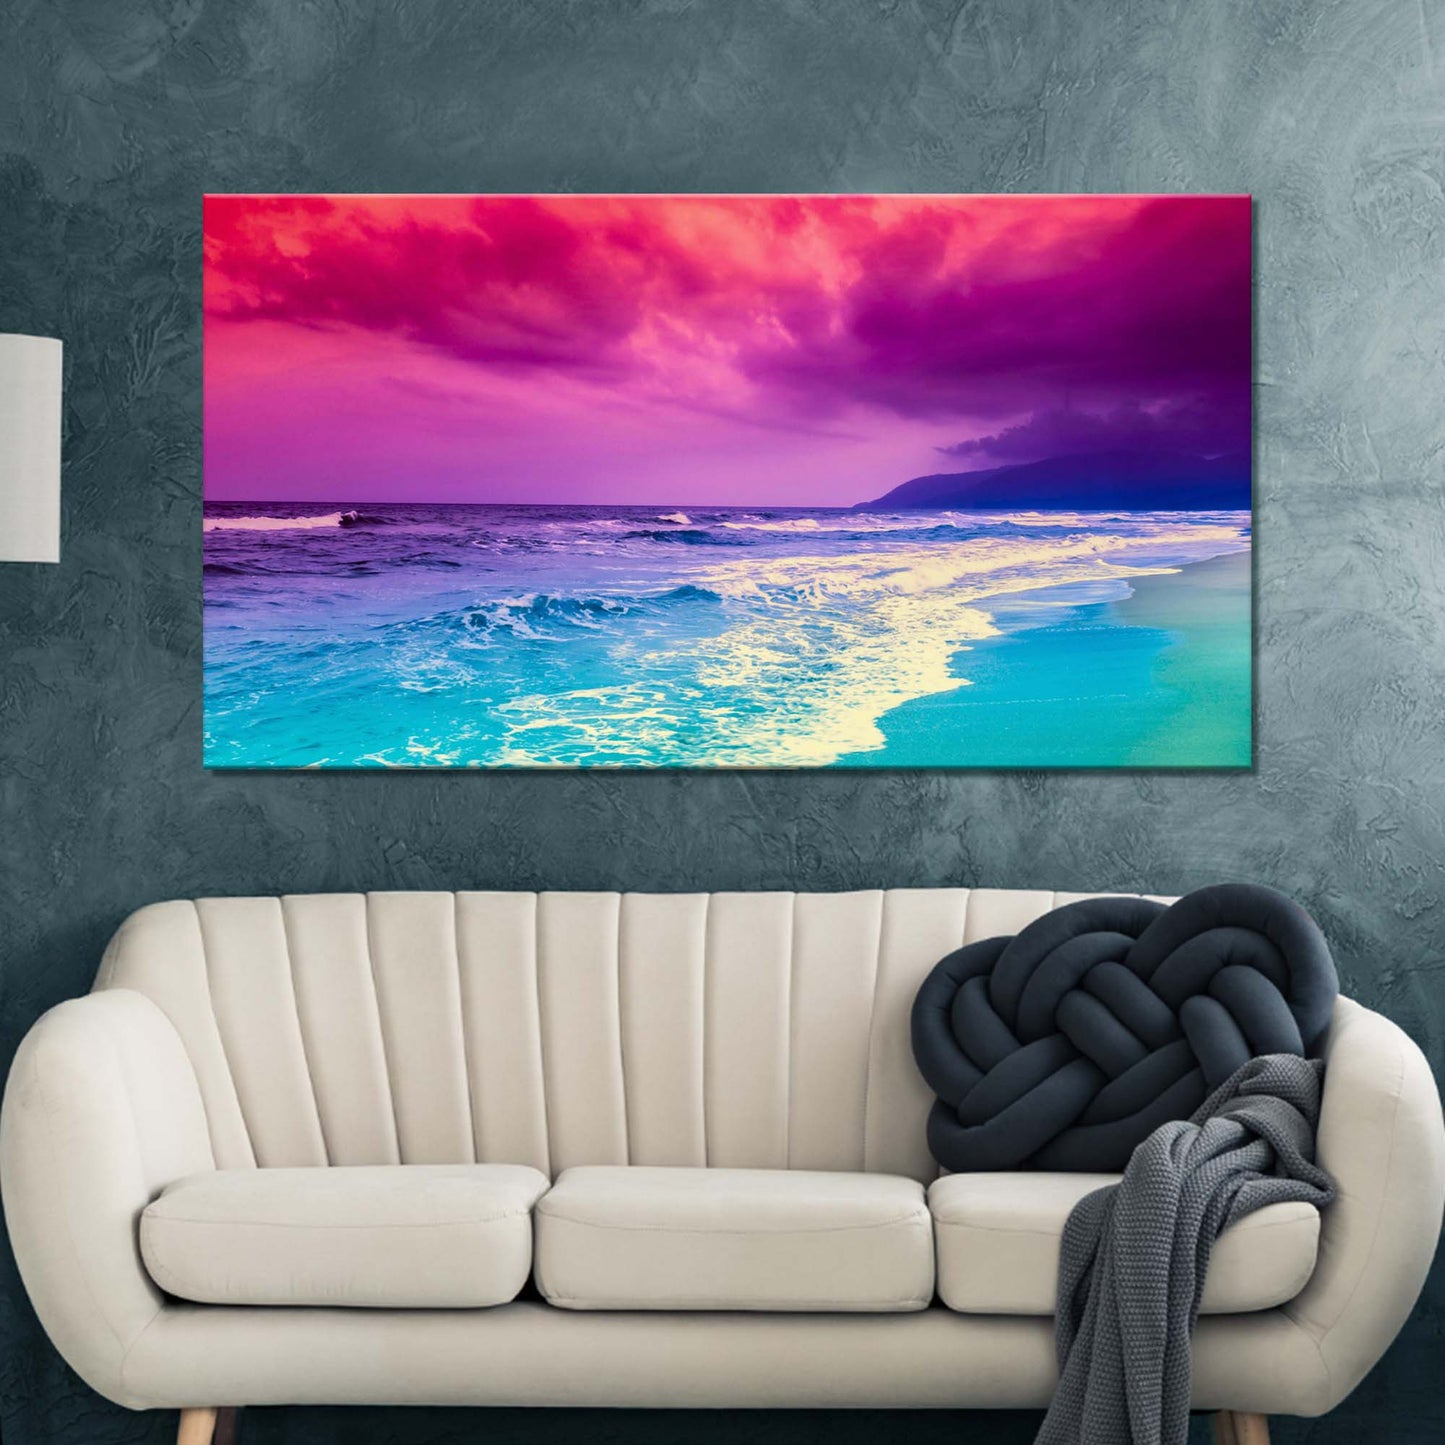 Blue Sea Under The Purple Sky Canvas Wall Art Style 2 - Image by Tailored Canvases